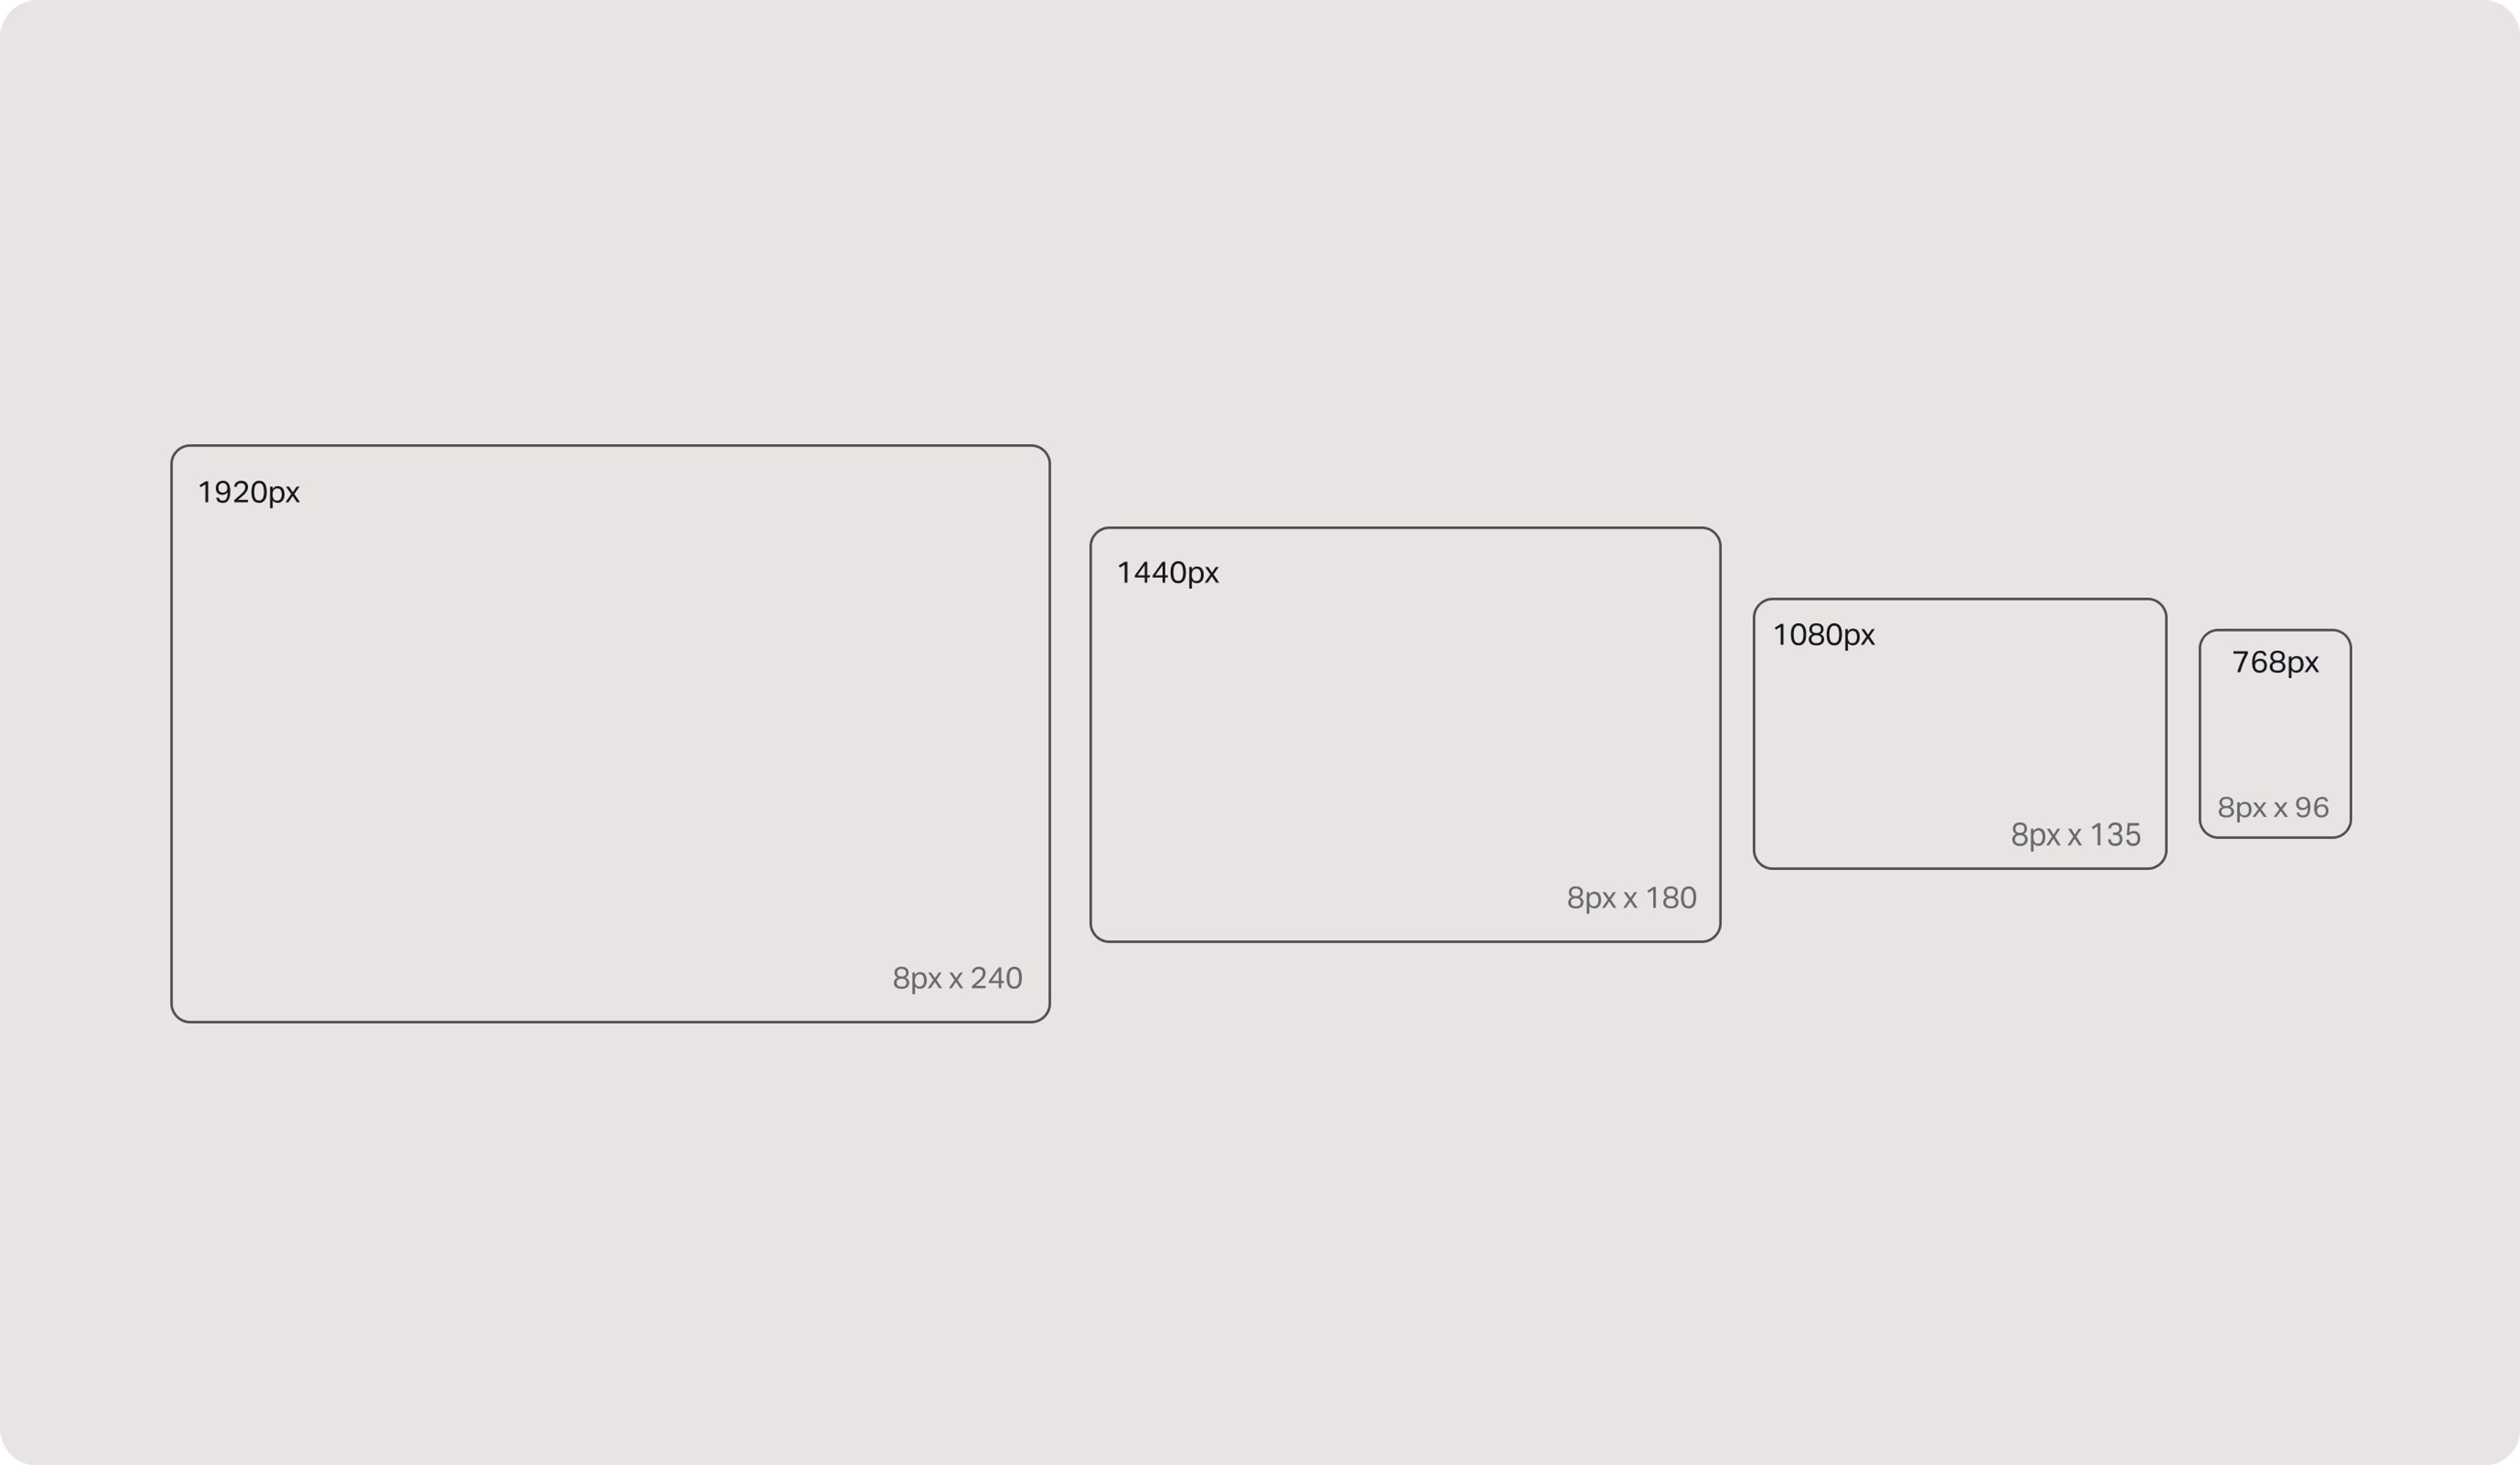 Accessibility in design - UI states, spacing and sizing